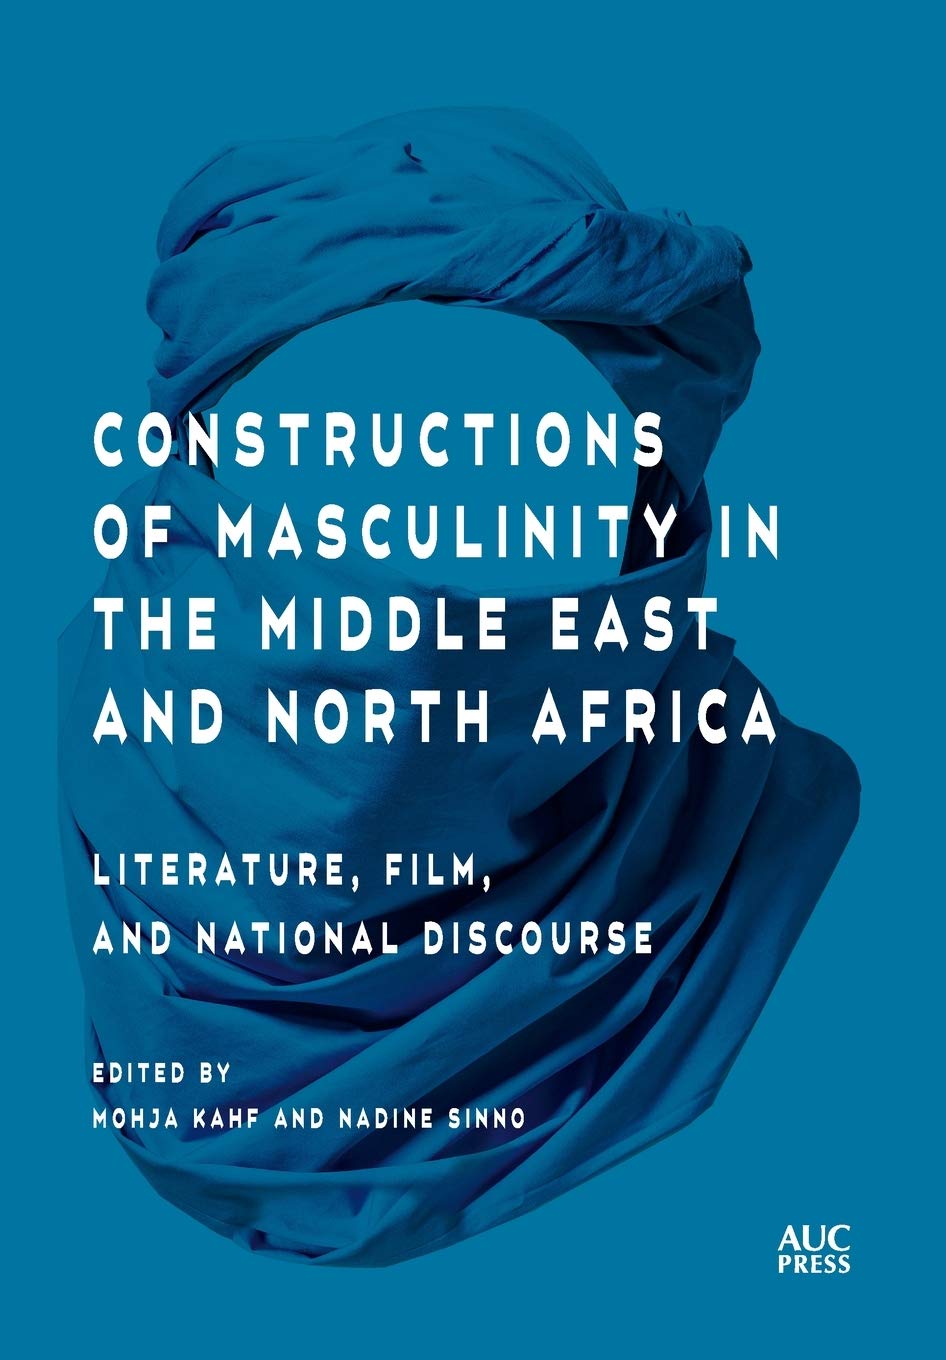 Constructions of Masculinity in the Middle East (April 2021) 